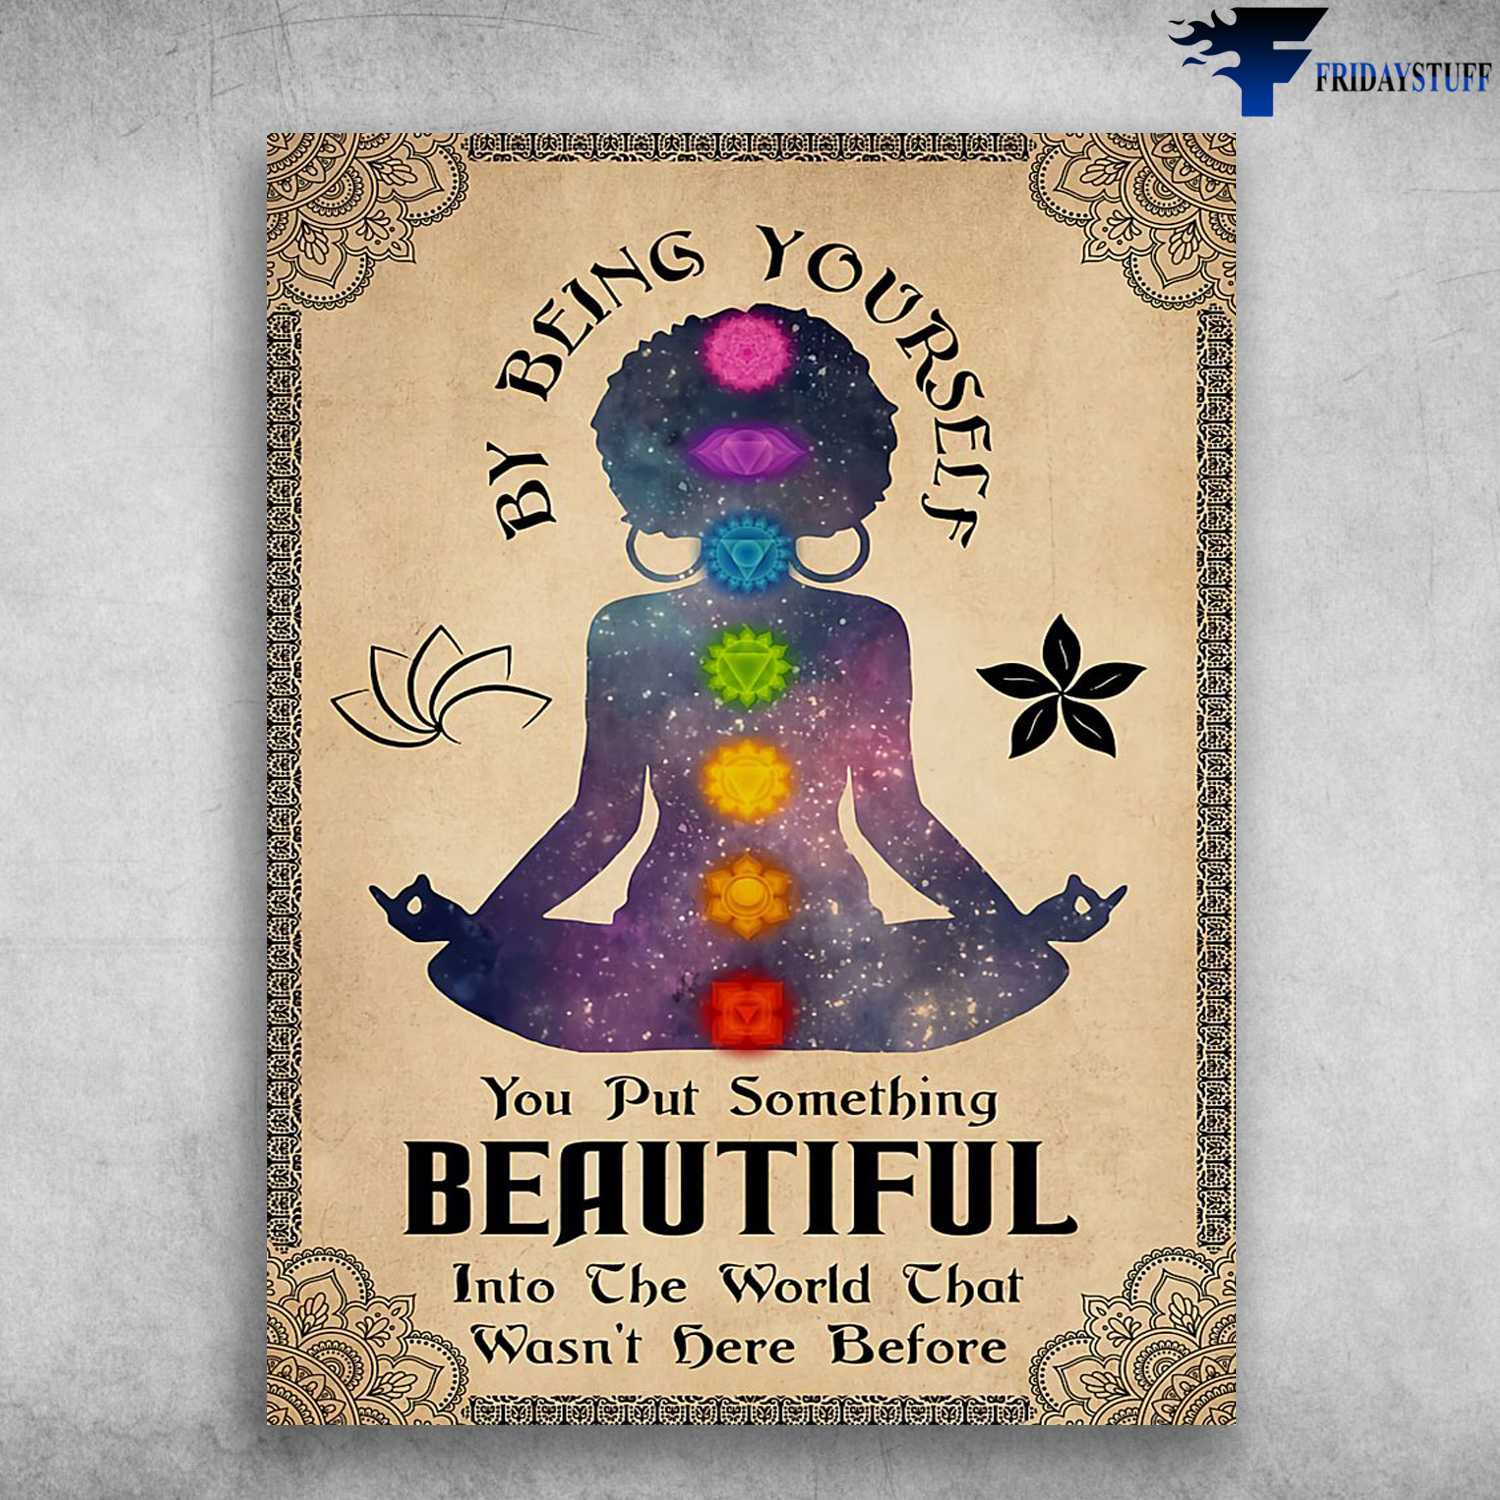 Yoga Girl, Yoga Poster - By Being Yourself, You Put Something Beautiful, Into The World That, Wasn't Here Before